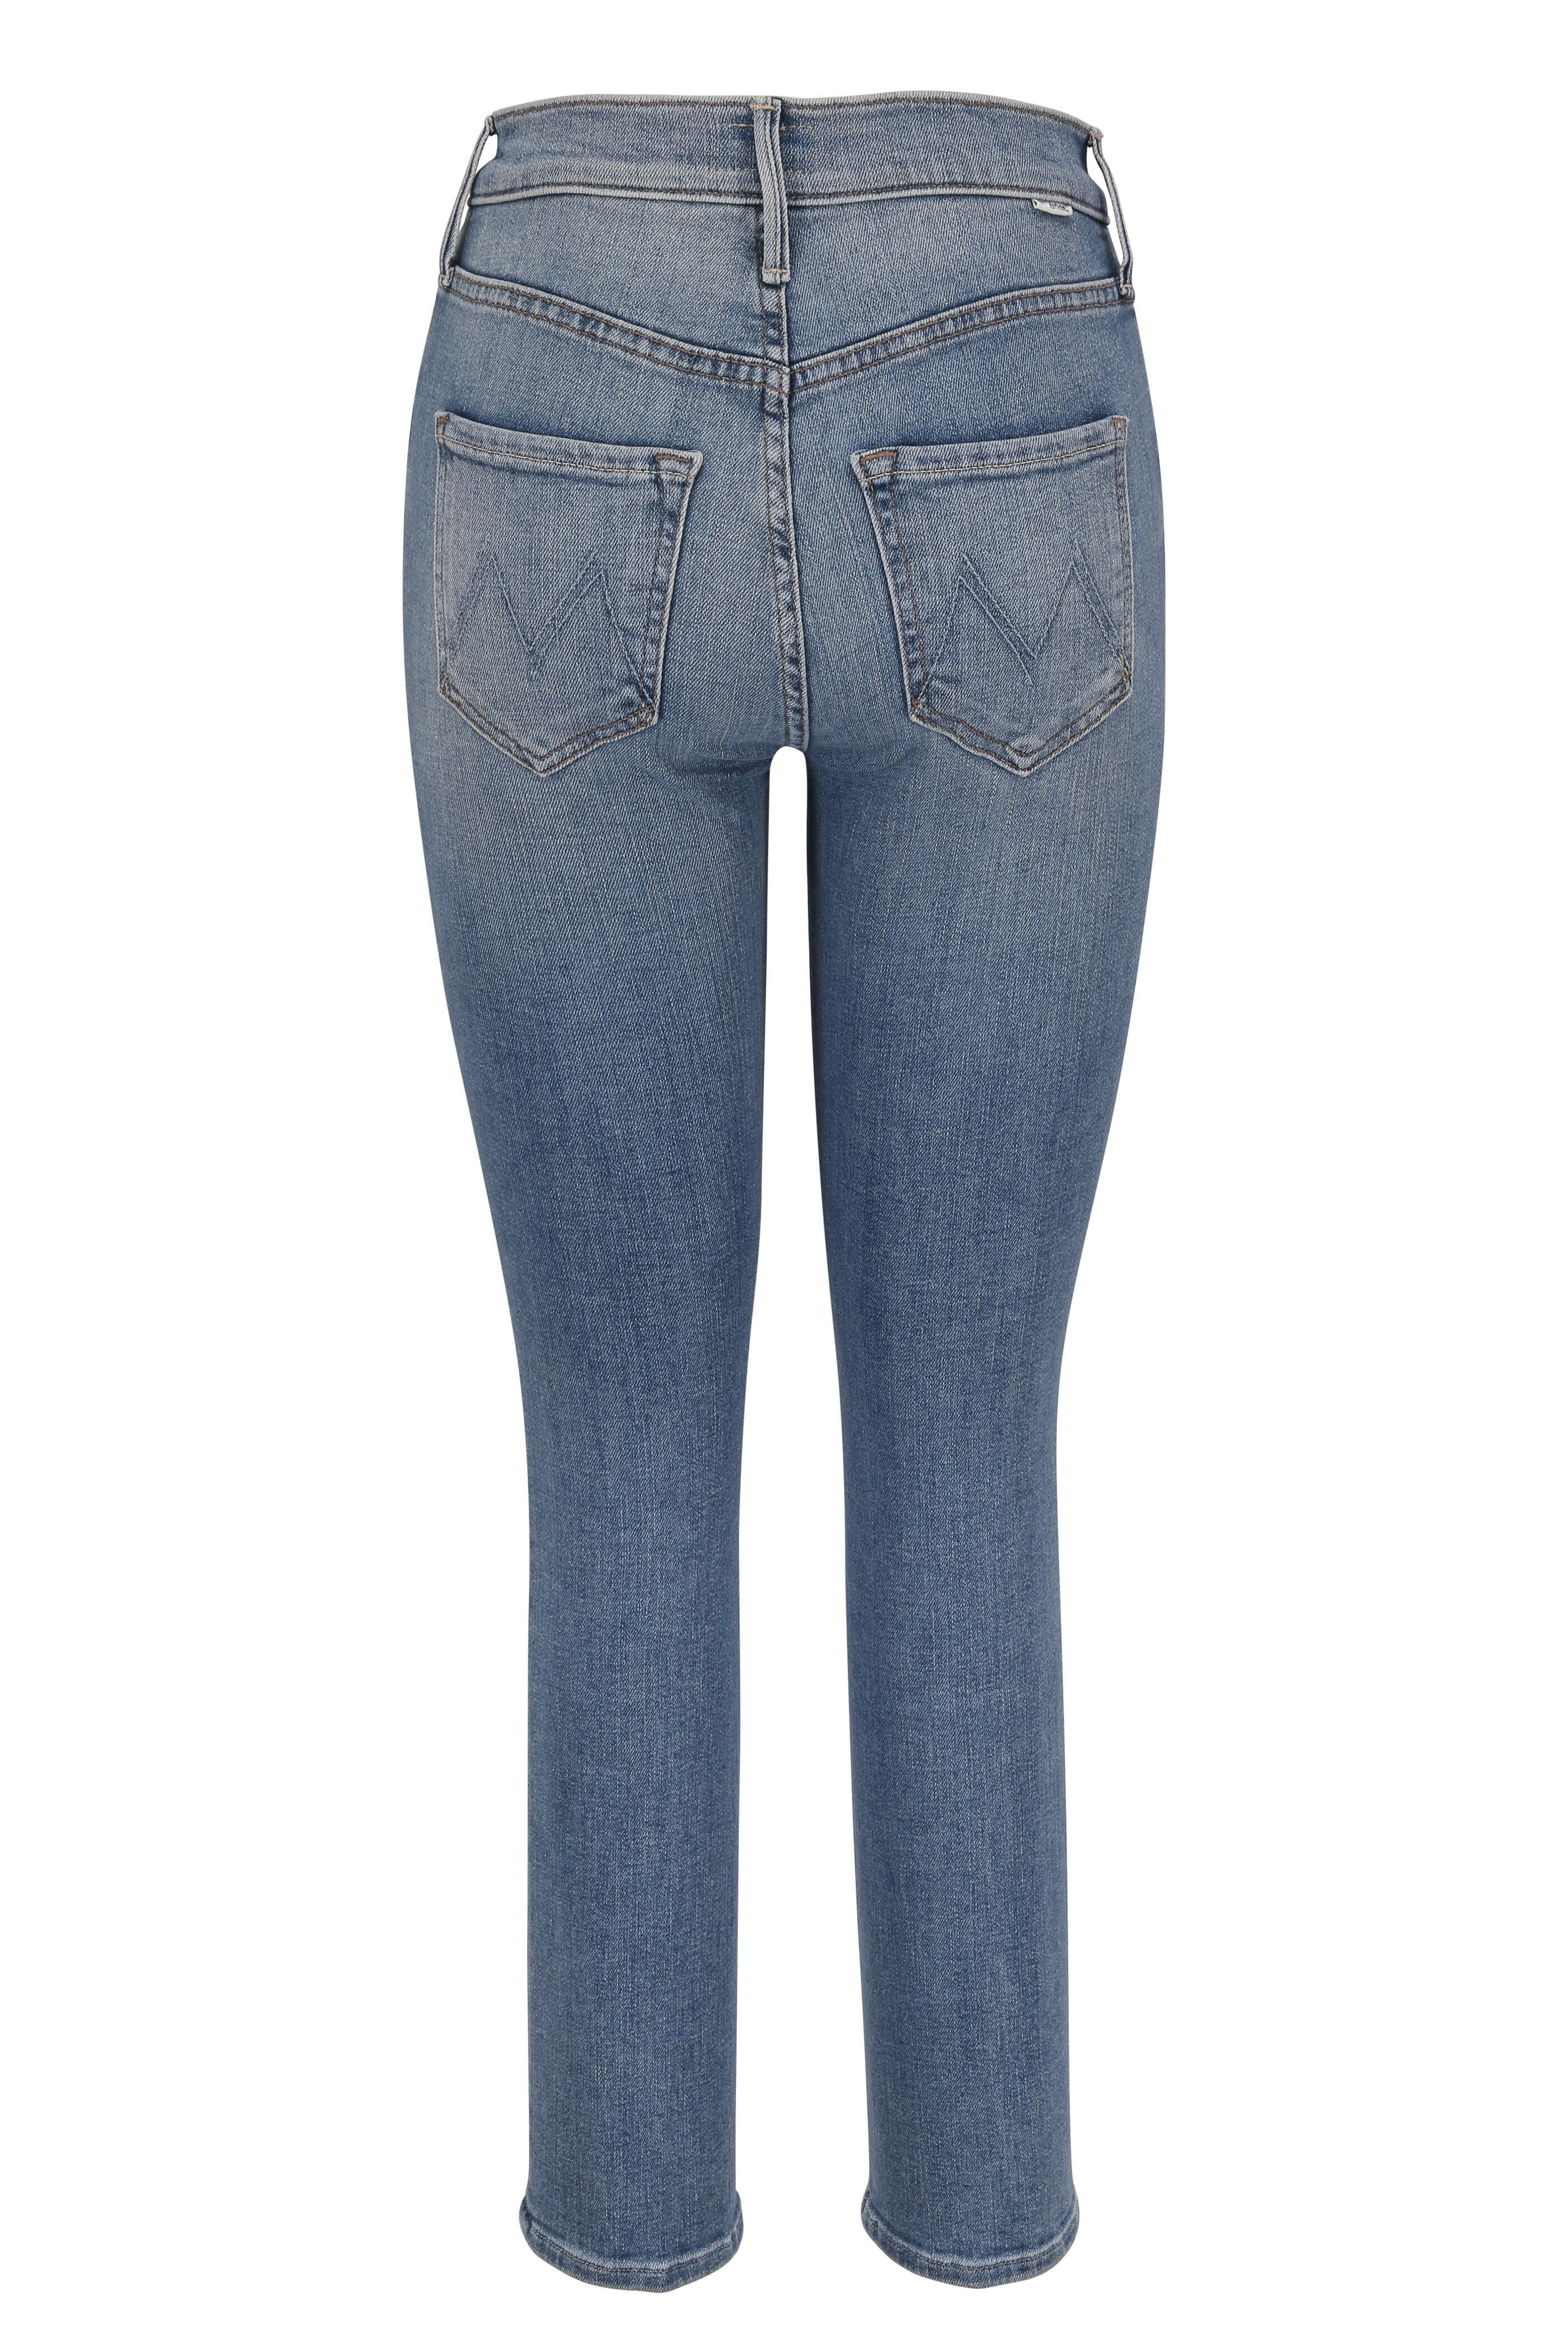 Mother Denim - Dazzler Camp Expert Mid-Rise Ankle Jean